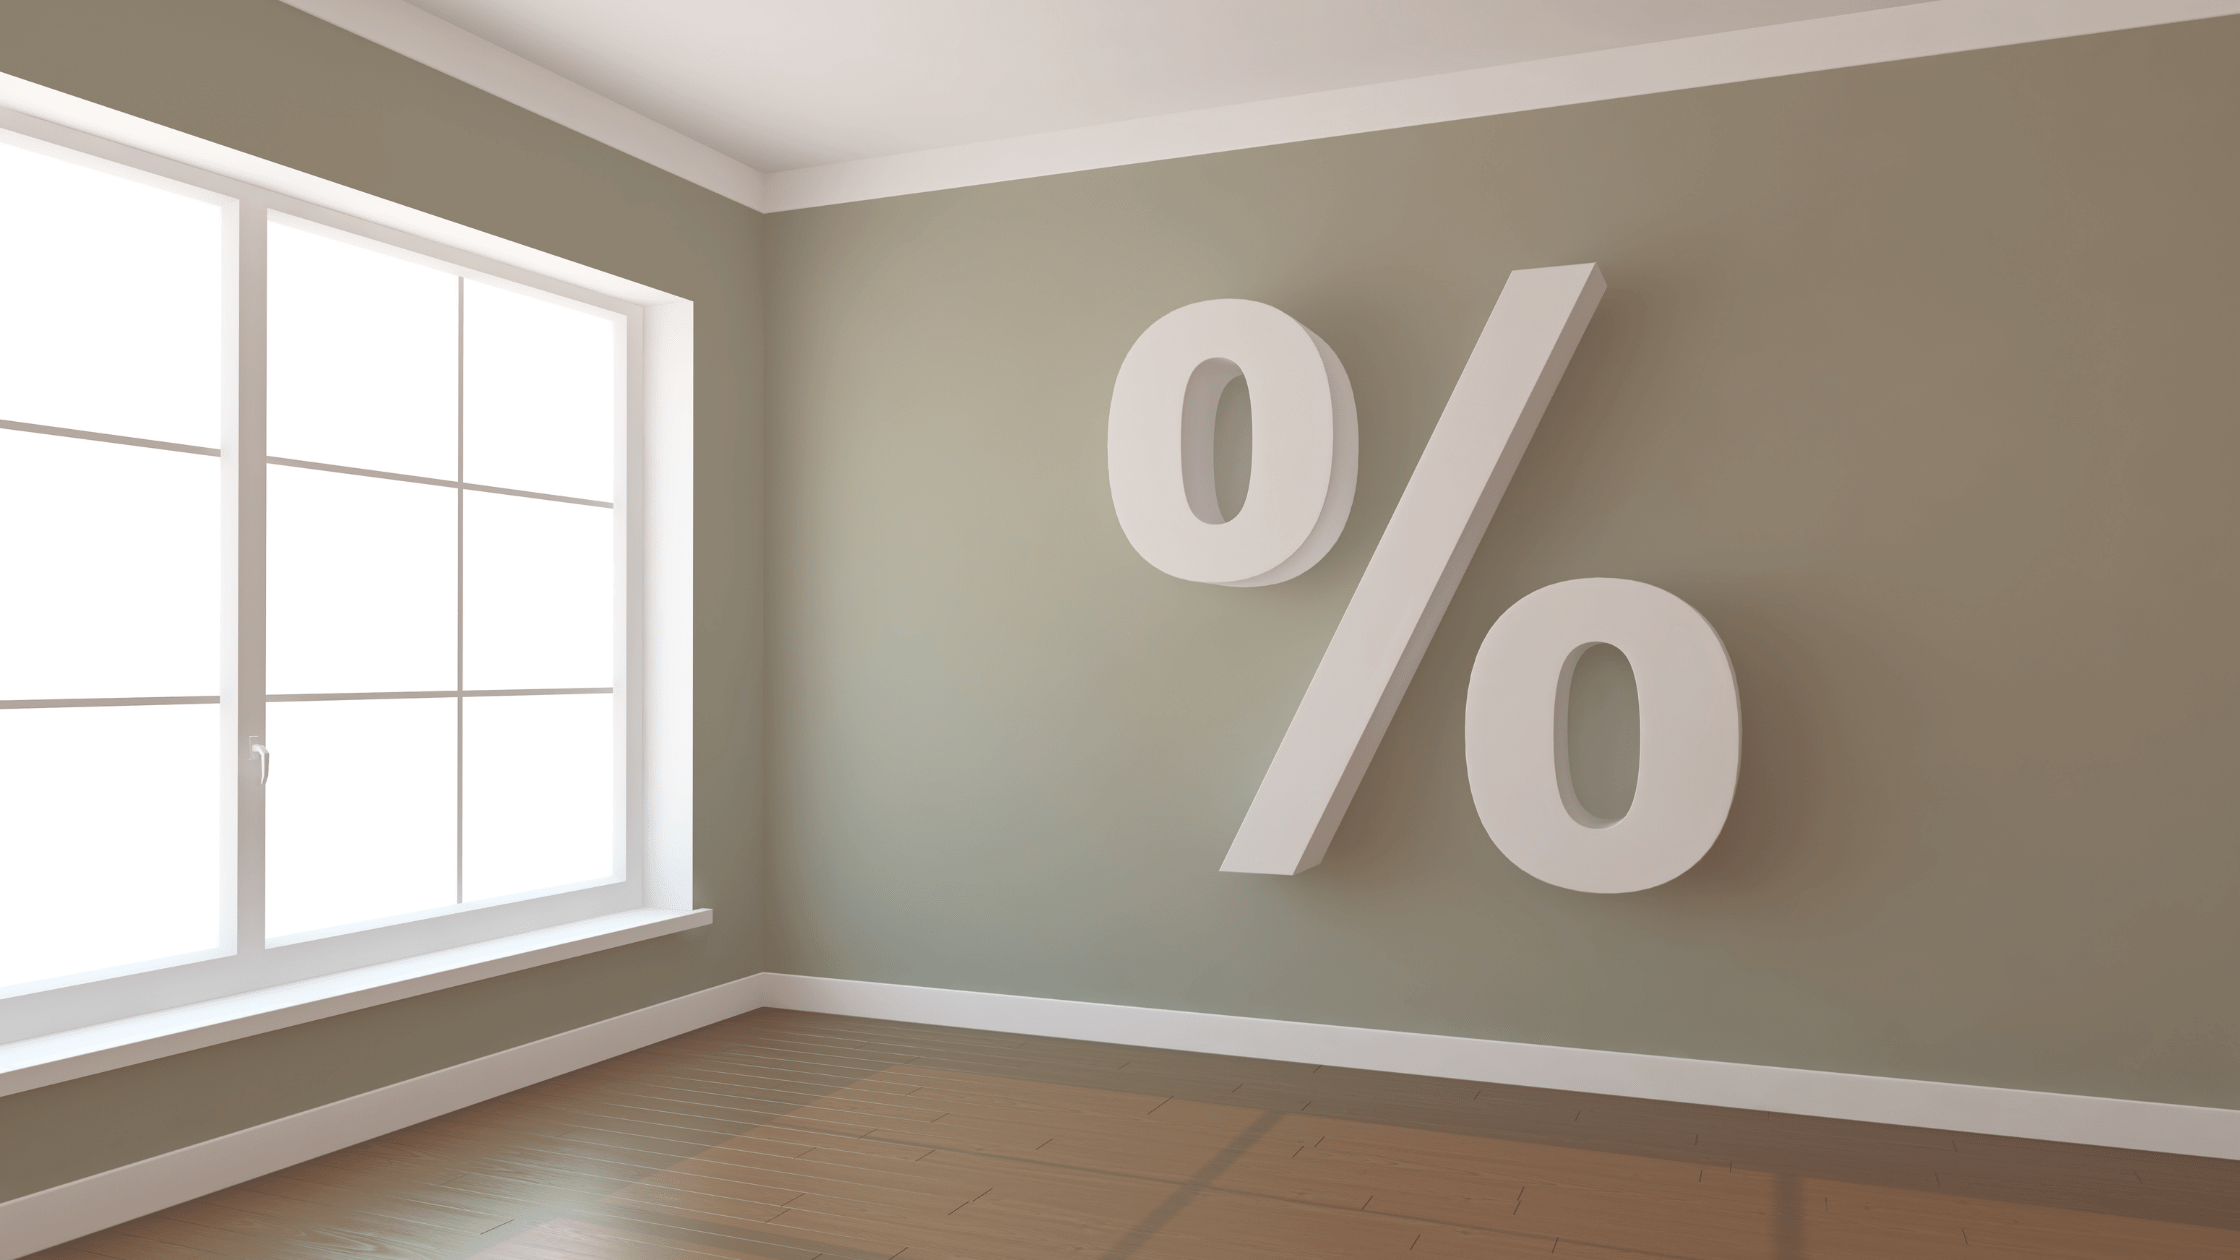 City of Chicago Announces 2021 Security Deposit Interest Rate